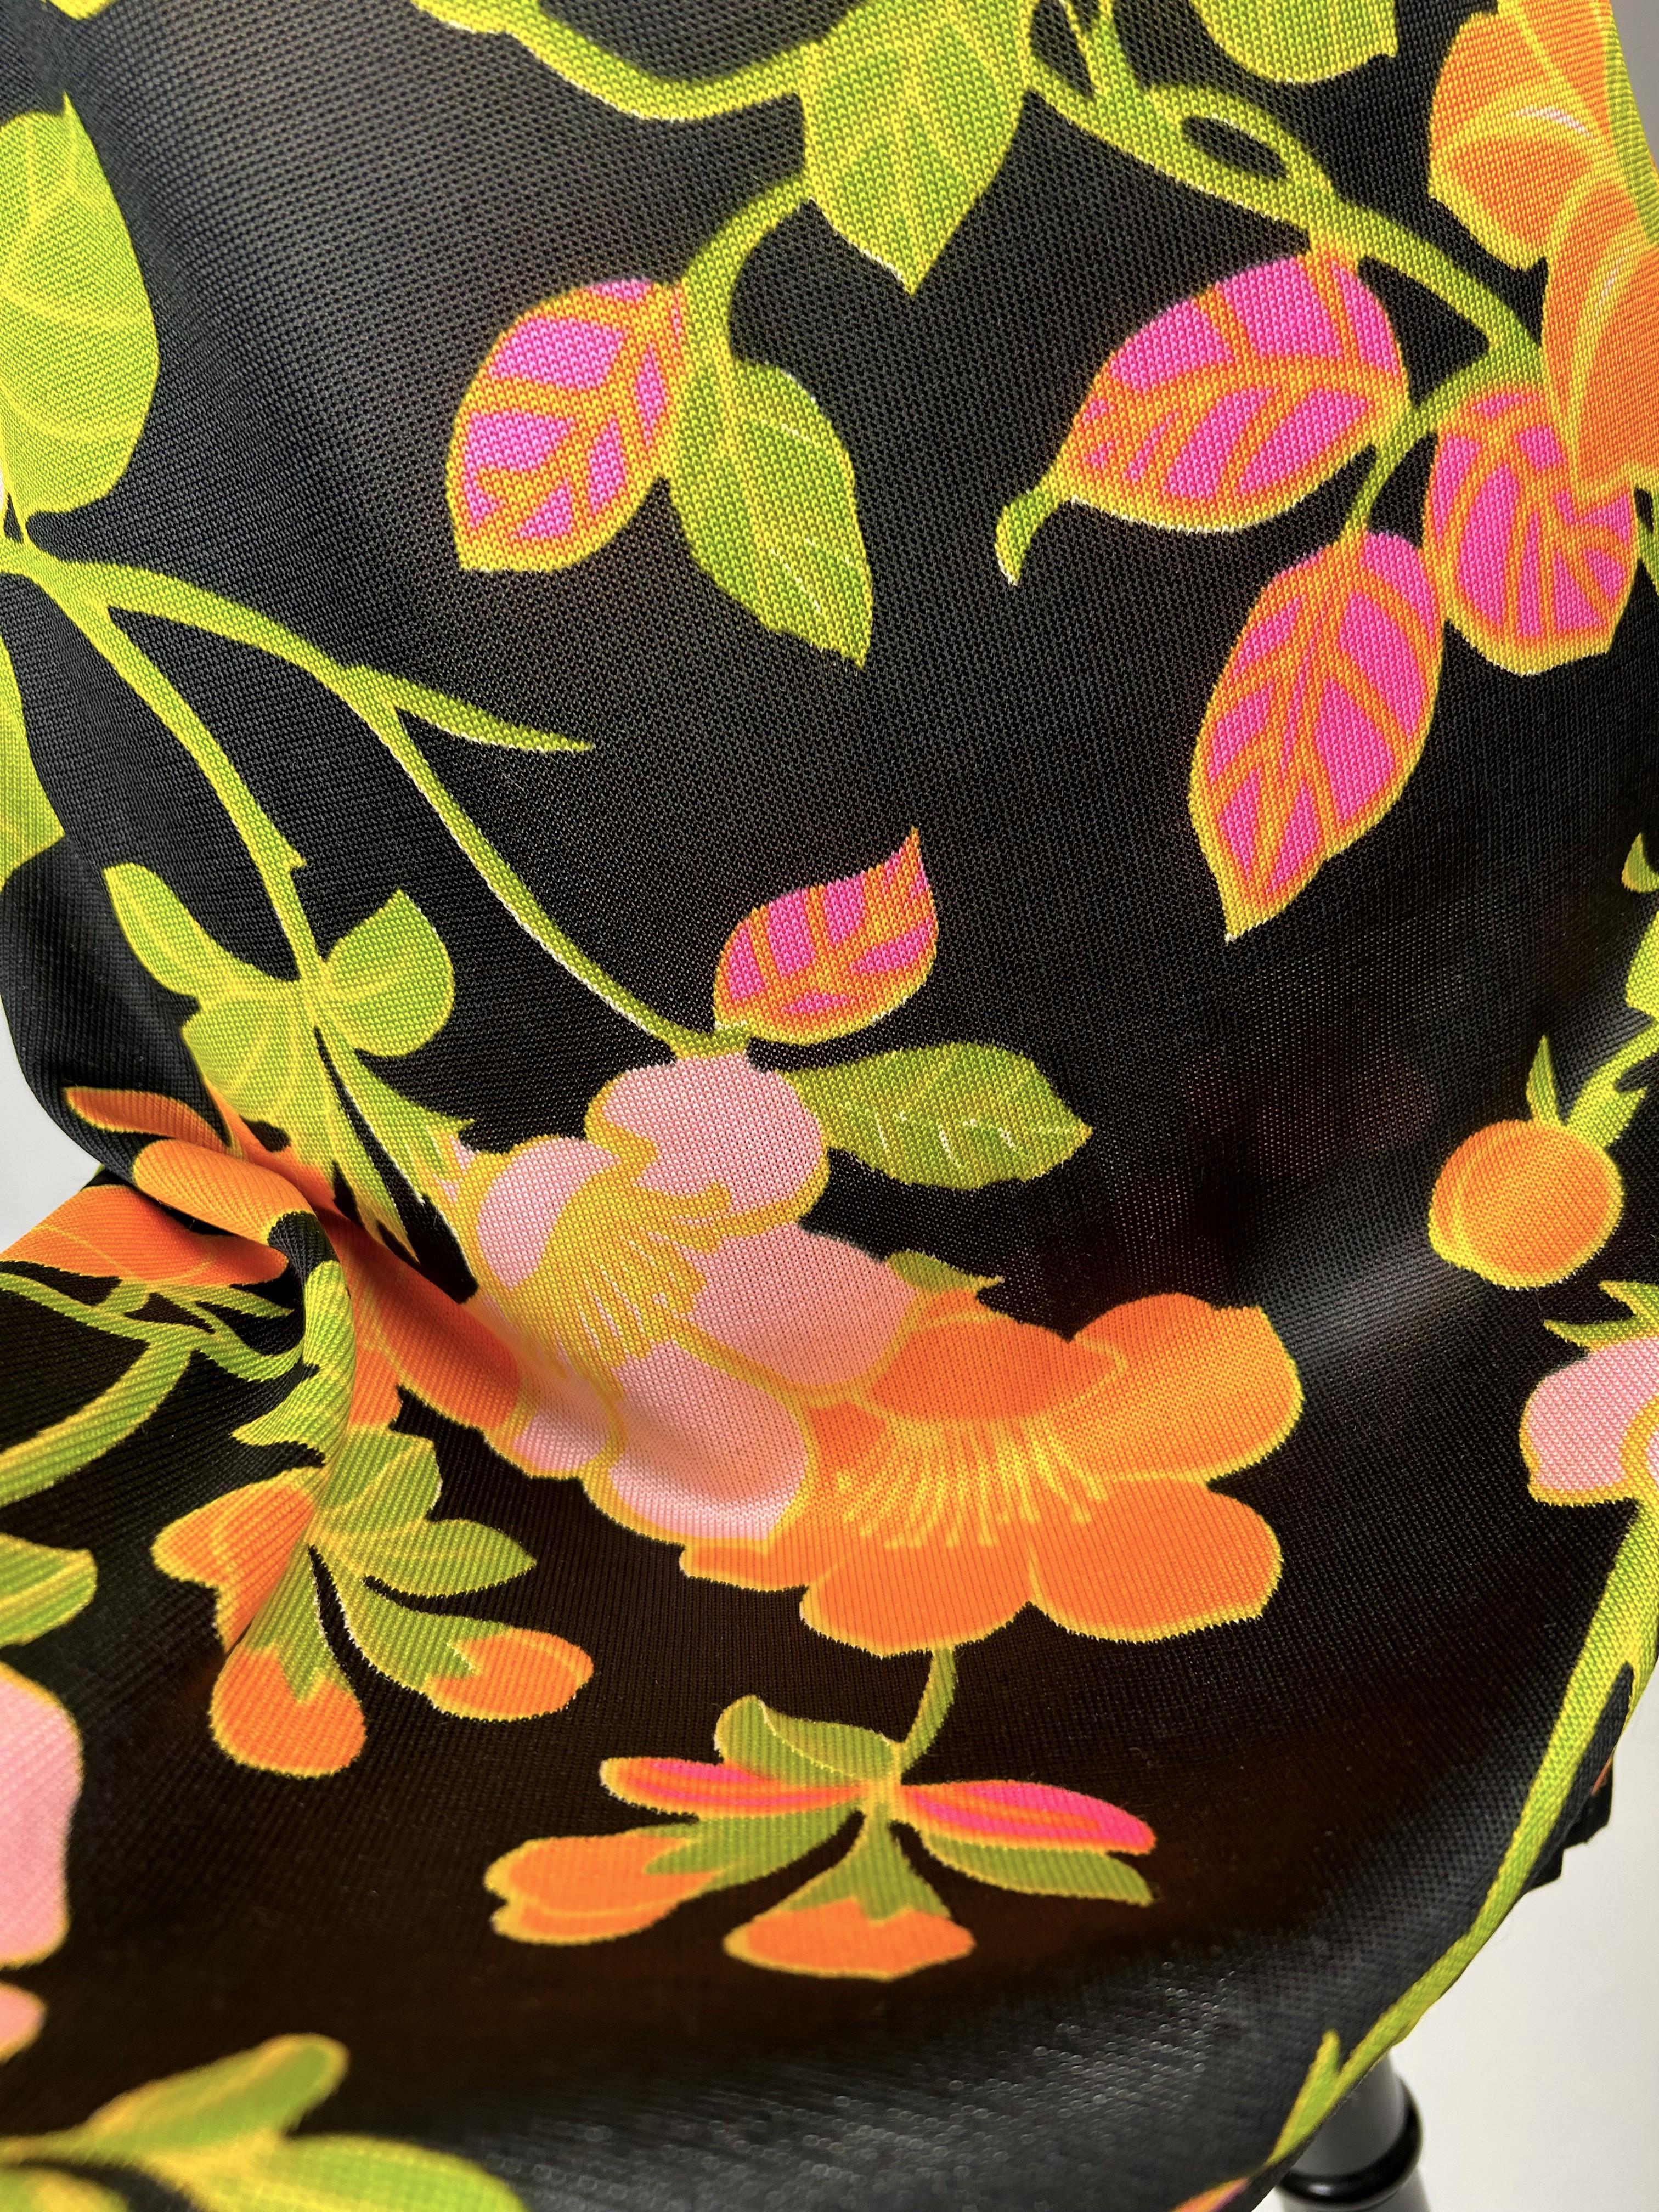 A Summer Dress By Léonard in silk knit printed with psychedelic flowers C. 1968 For Sale 8